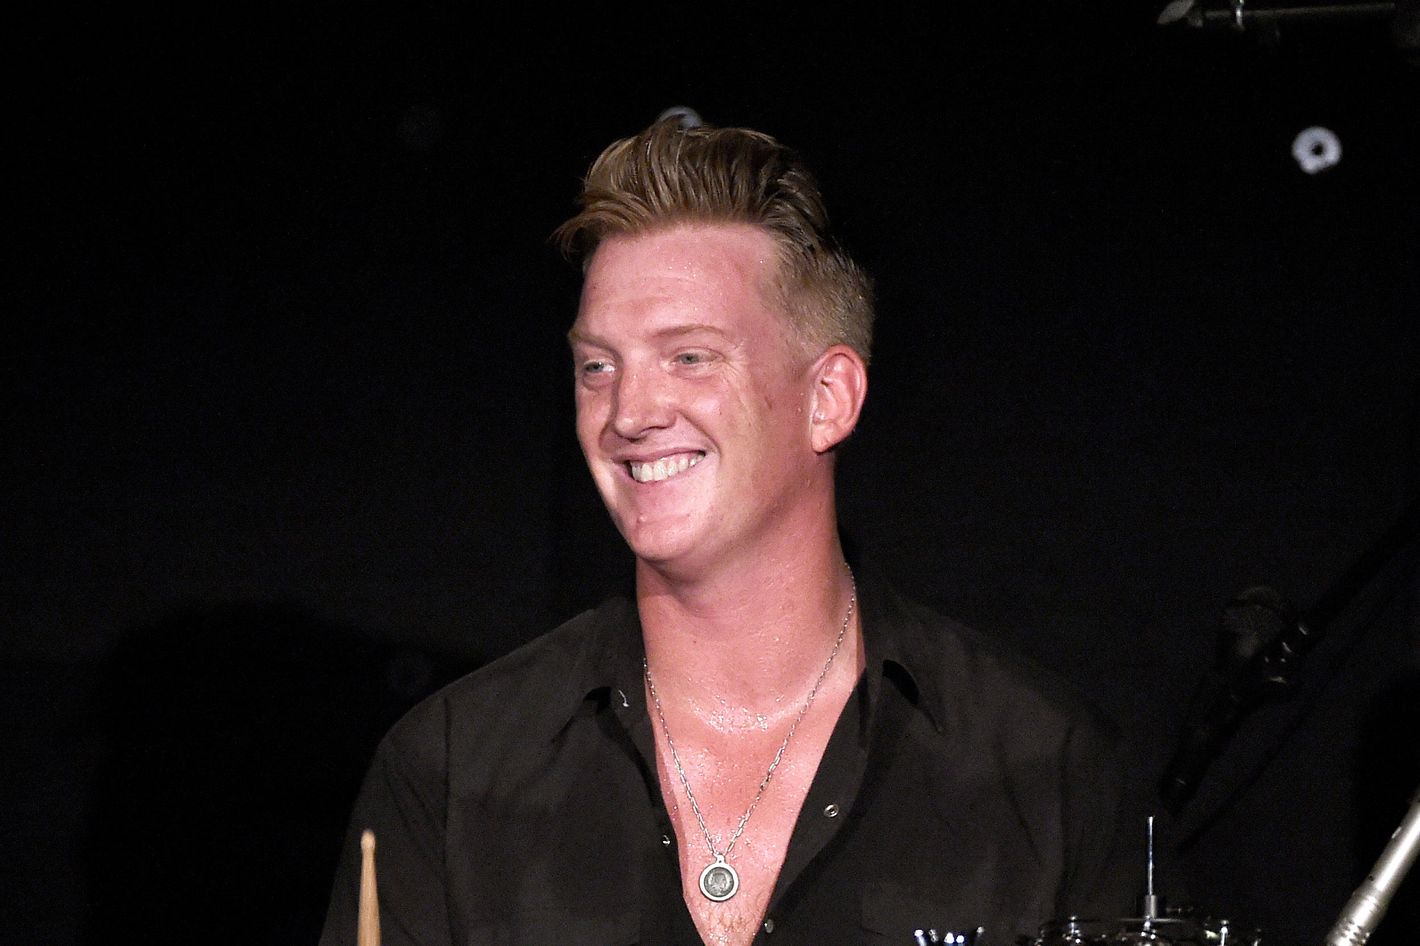 Eagles Of Death Metal's Josh Homme Collects Donations for Paris